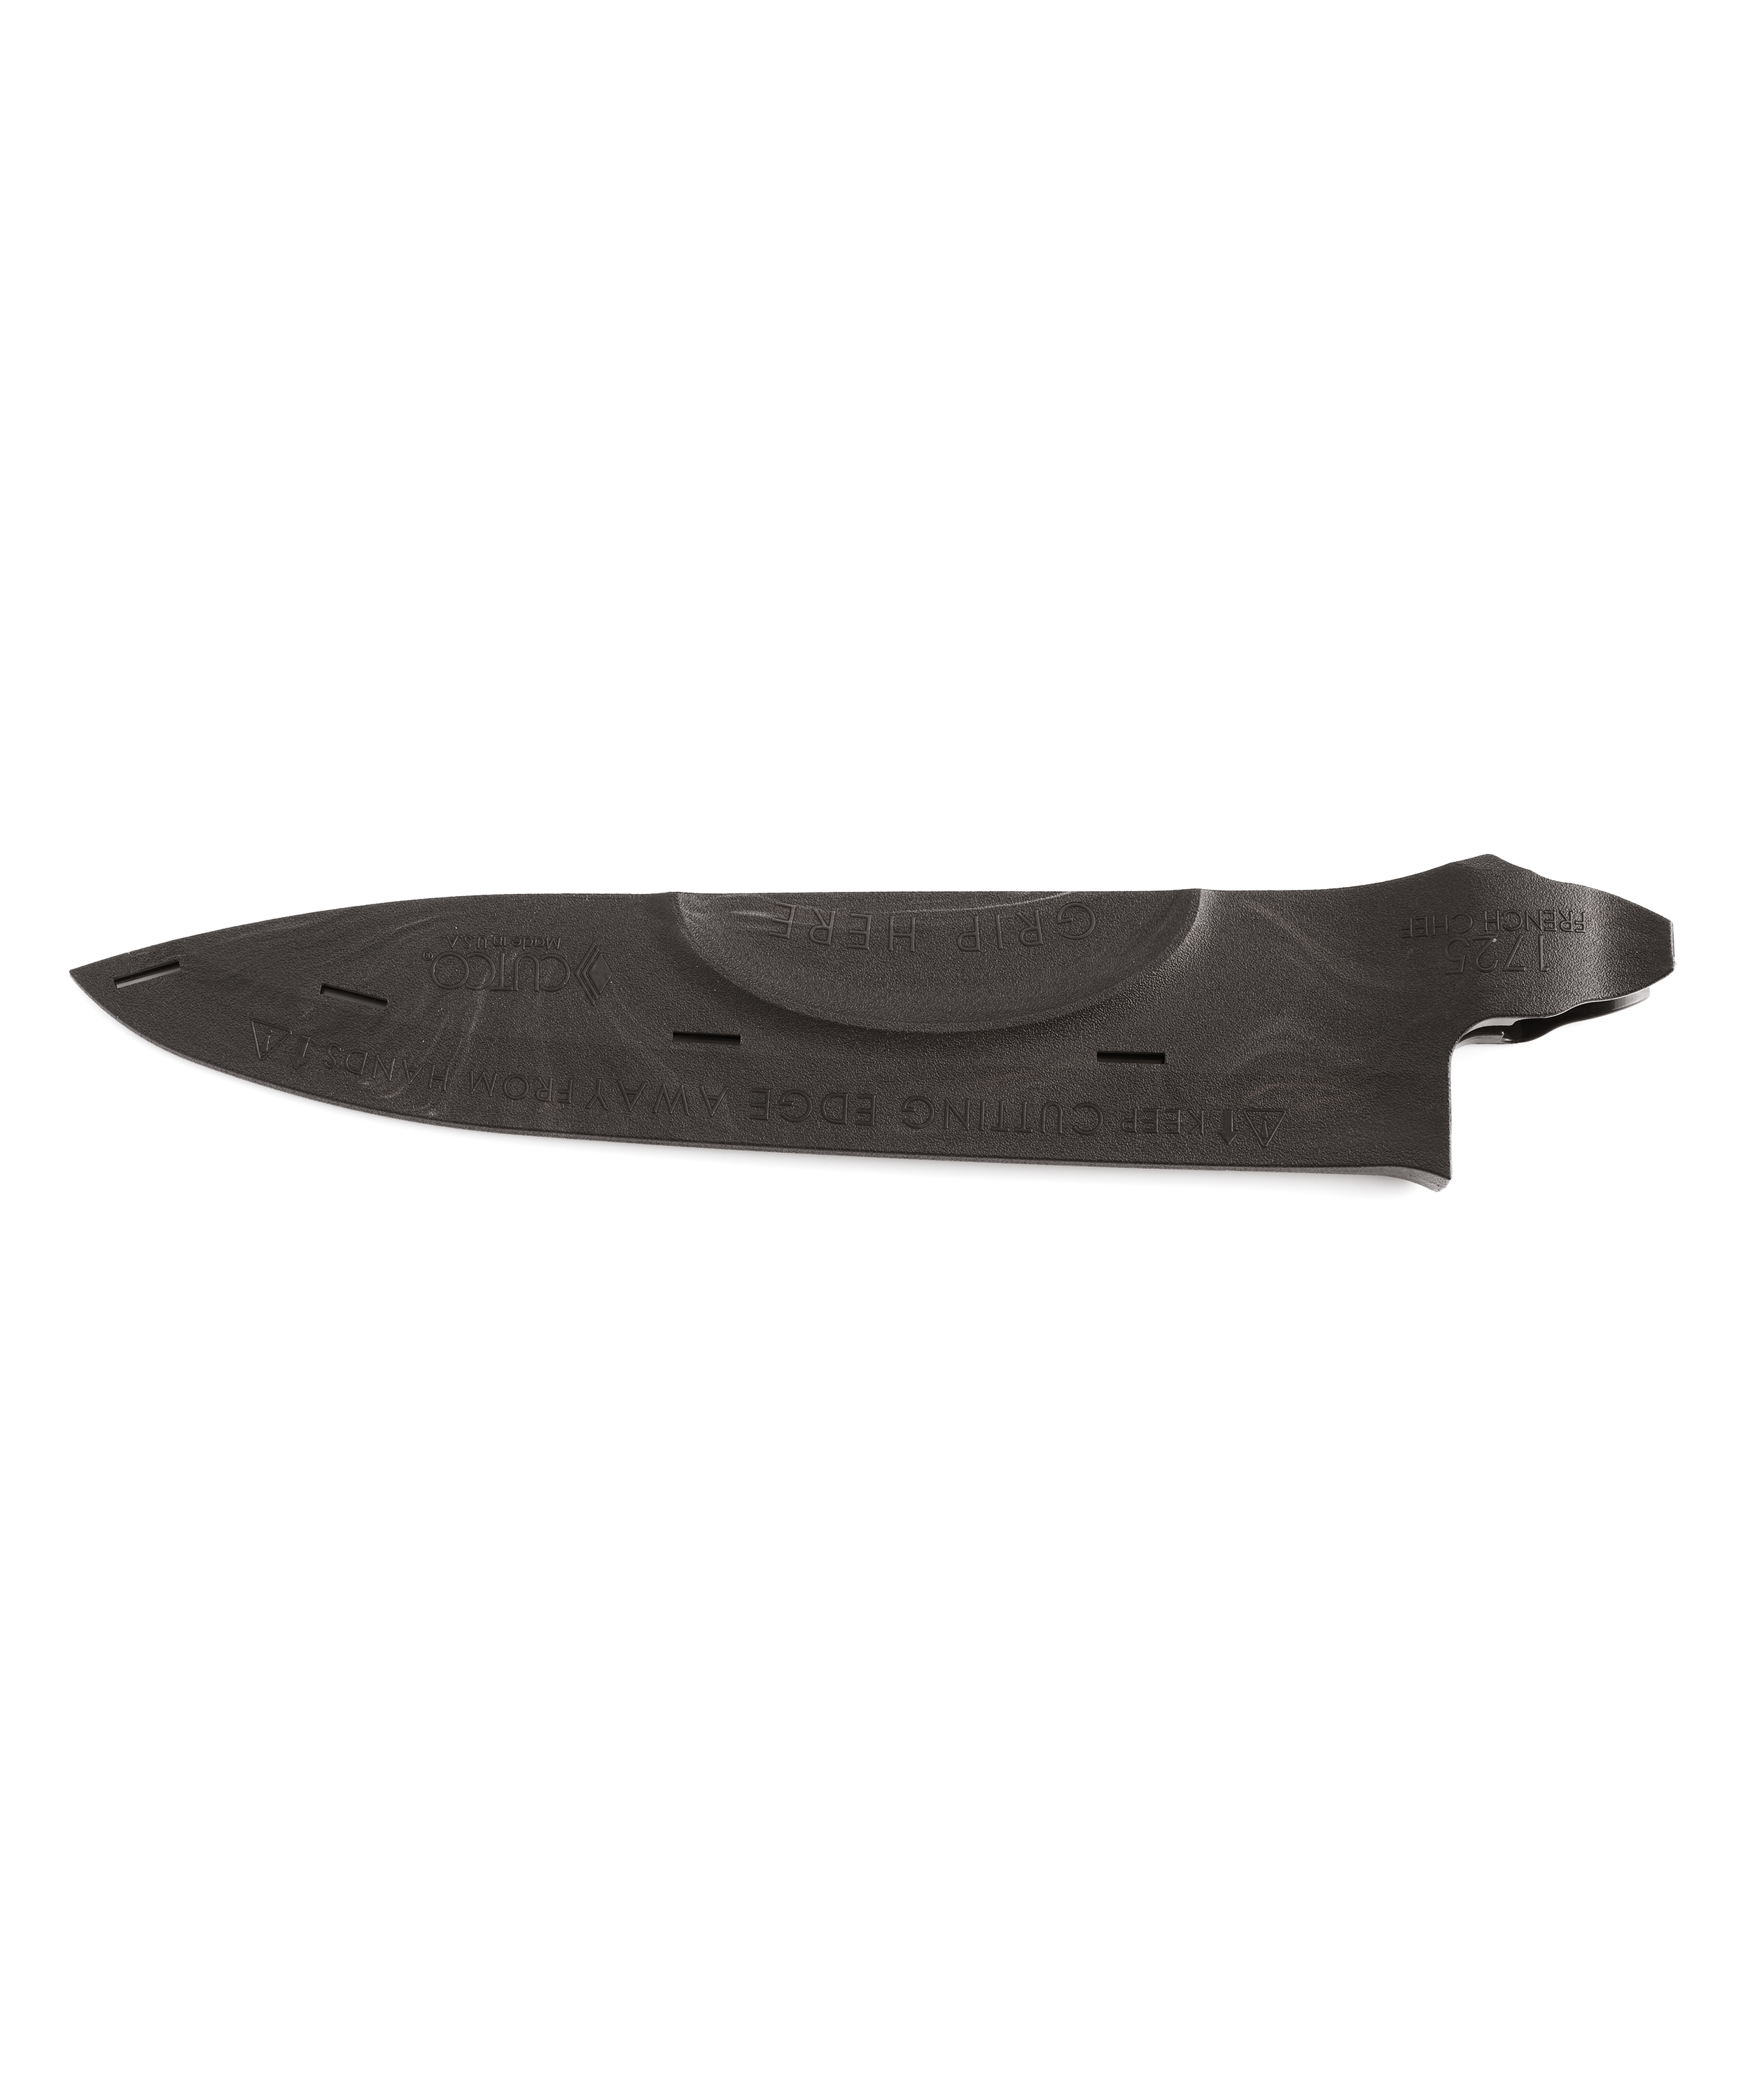 9-1/4 French Chef with Sheath